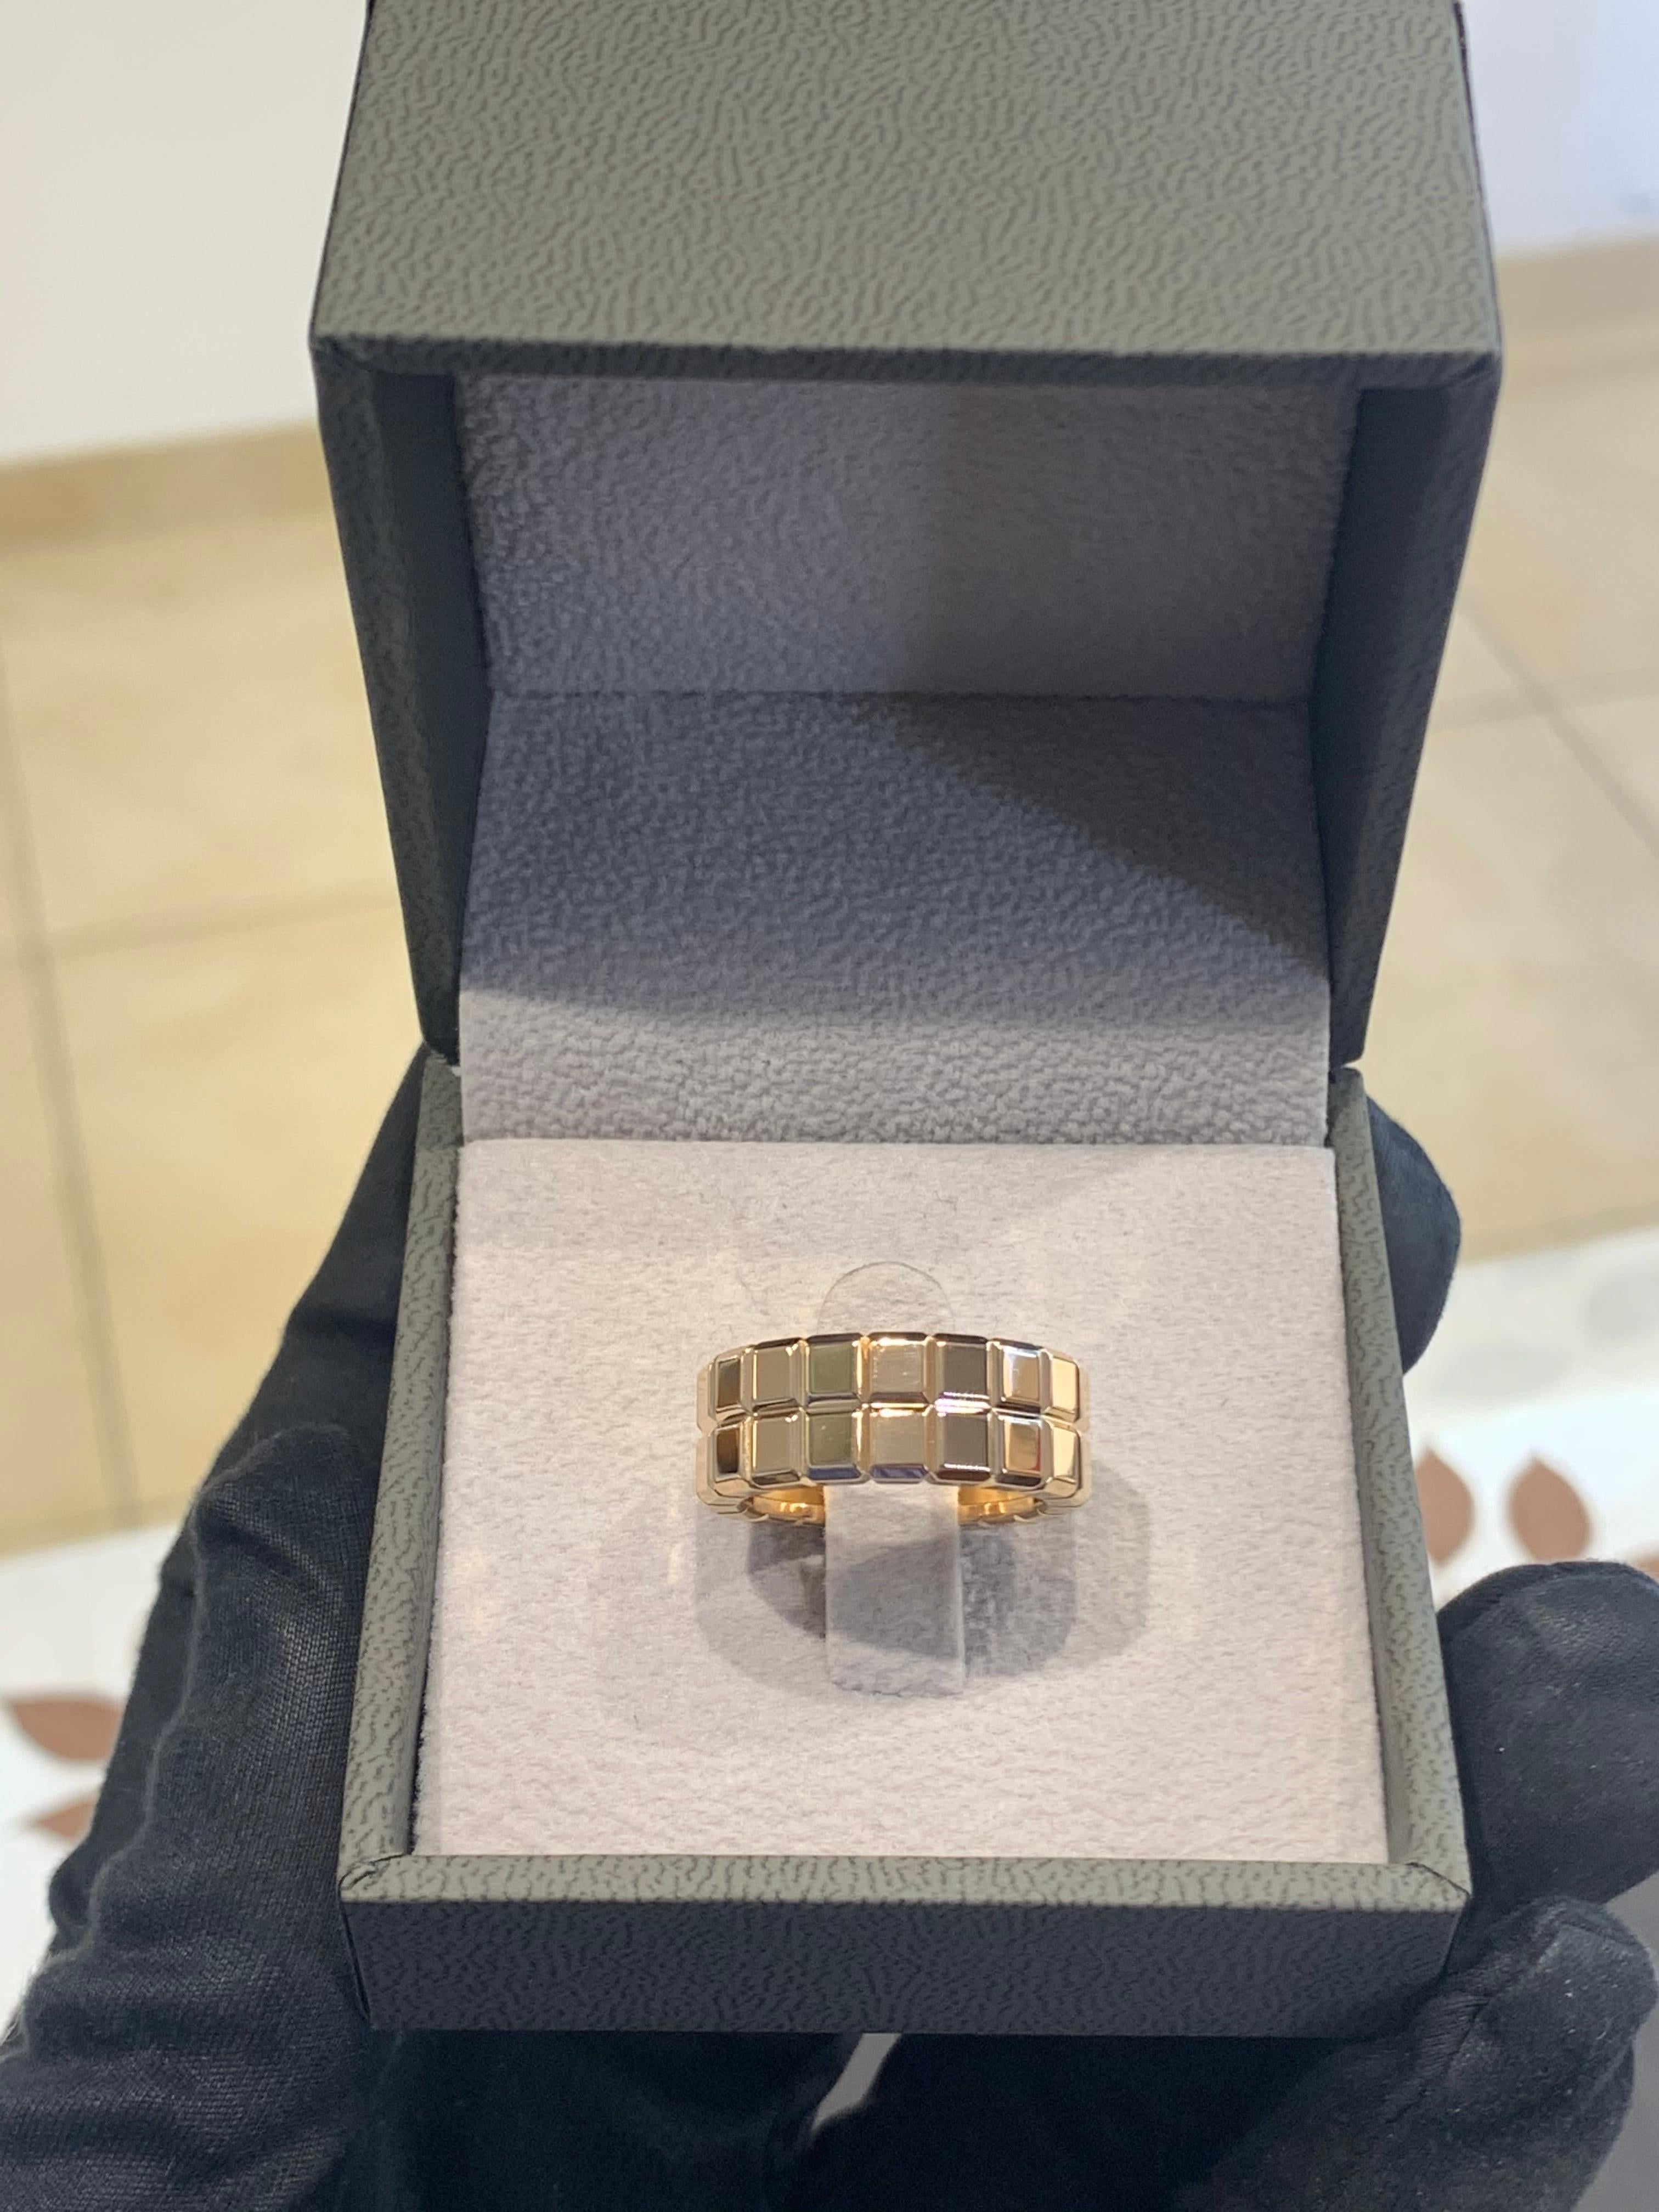 Original Chopard 18k Rose Gold Double-Row Ring From The “Ice Cube” Collection. 
Signed By “Chopard”.
Very Well Made. 
Comfortable Fit On The Hand.
Great Unisex Ring.